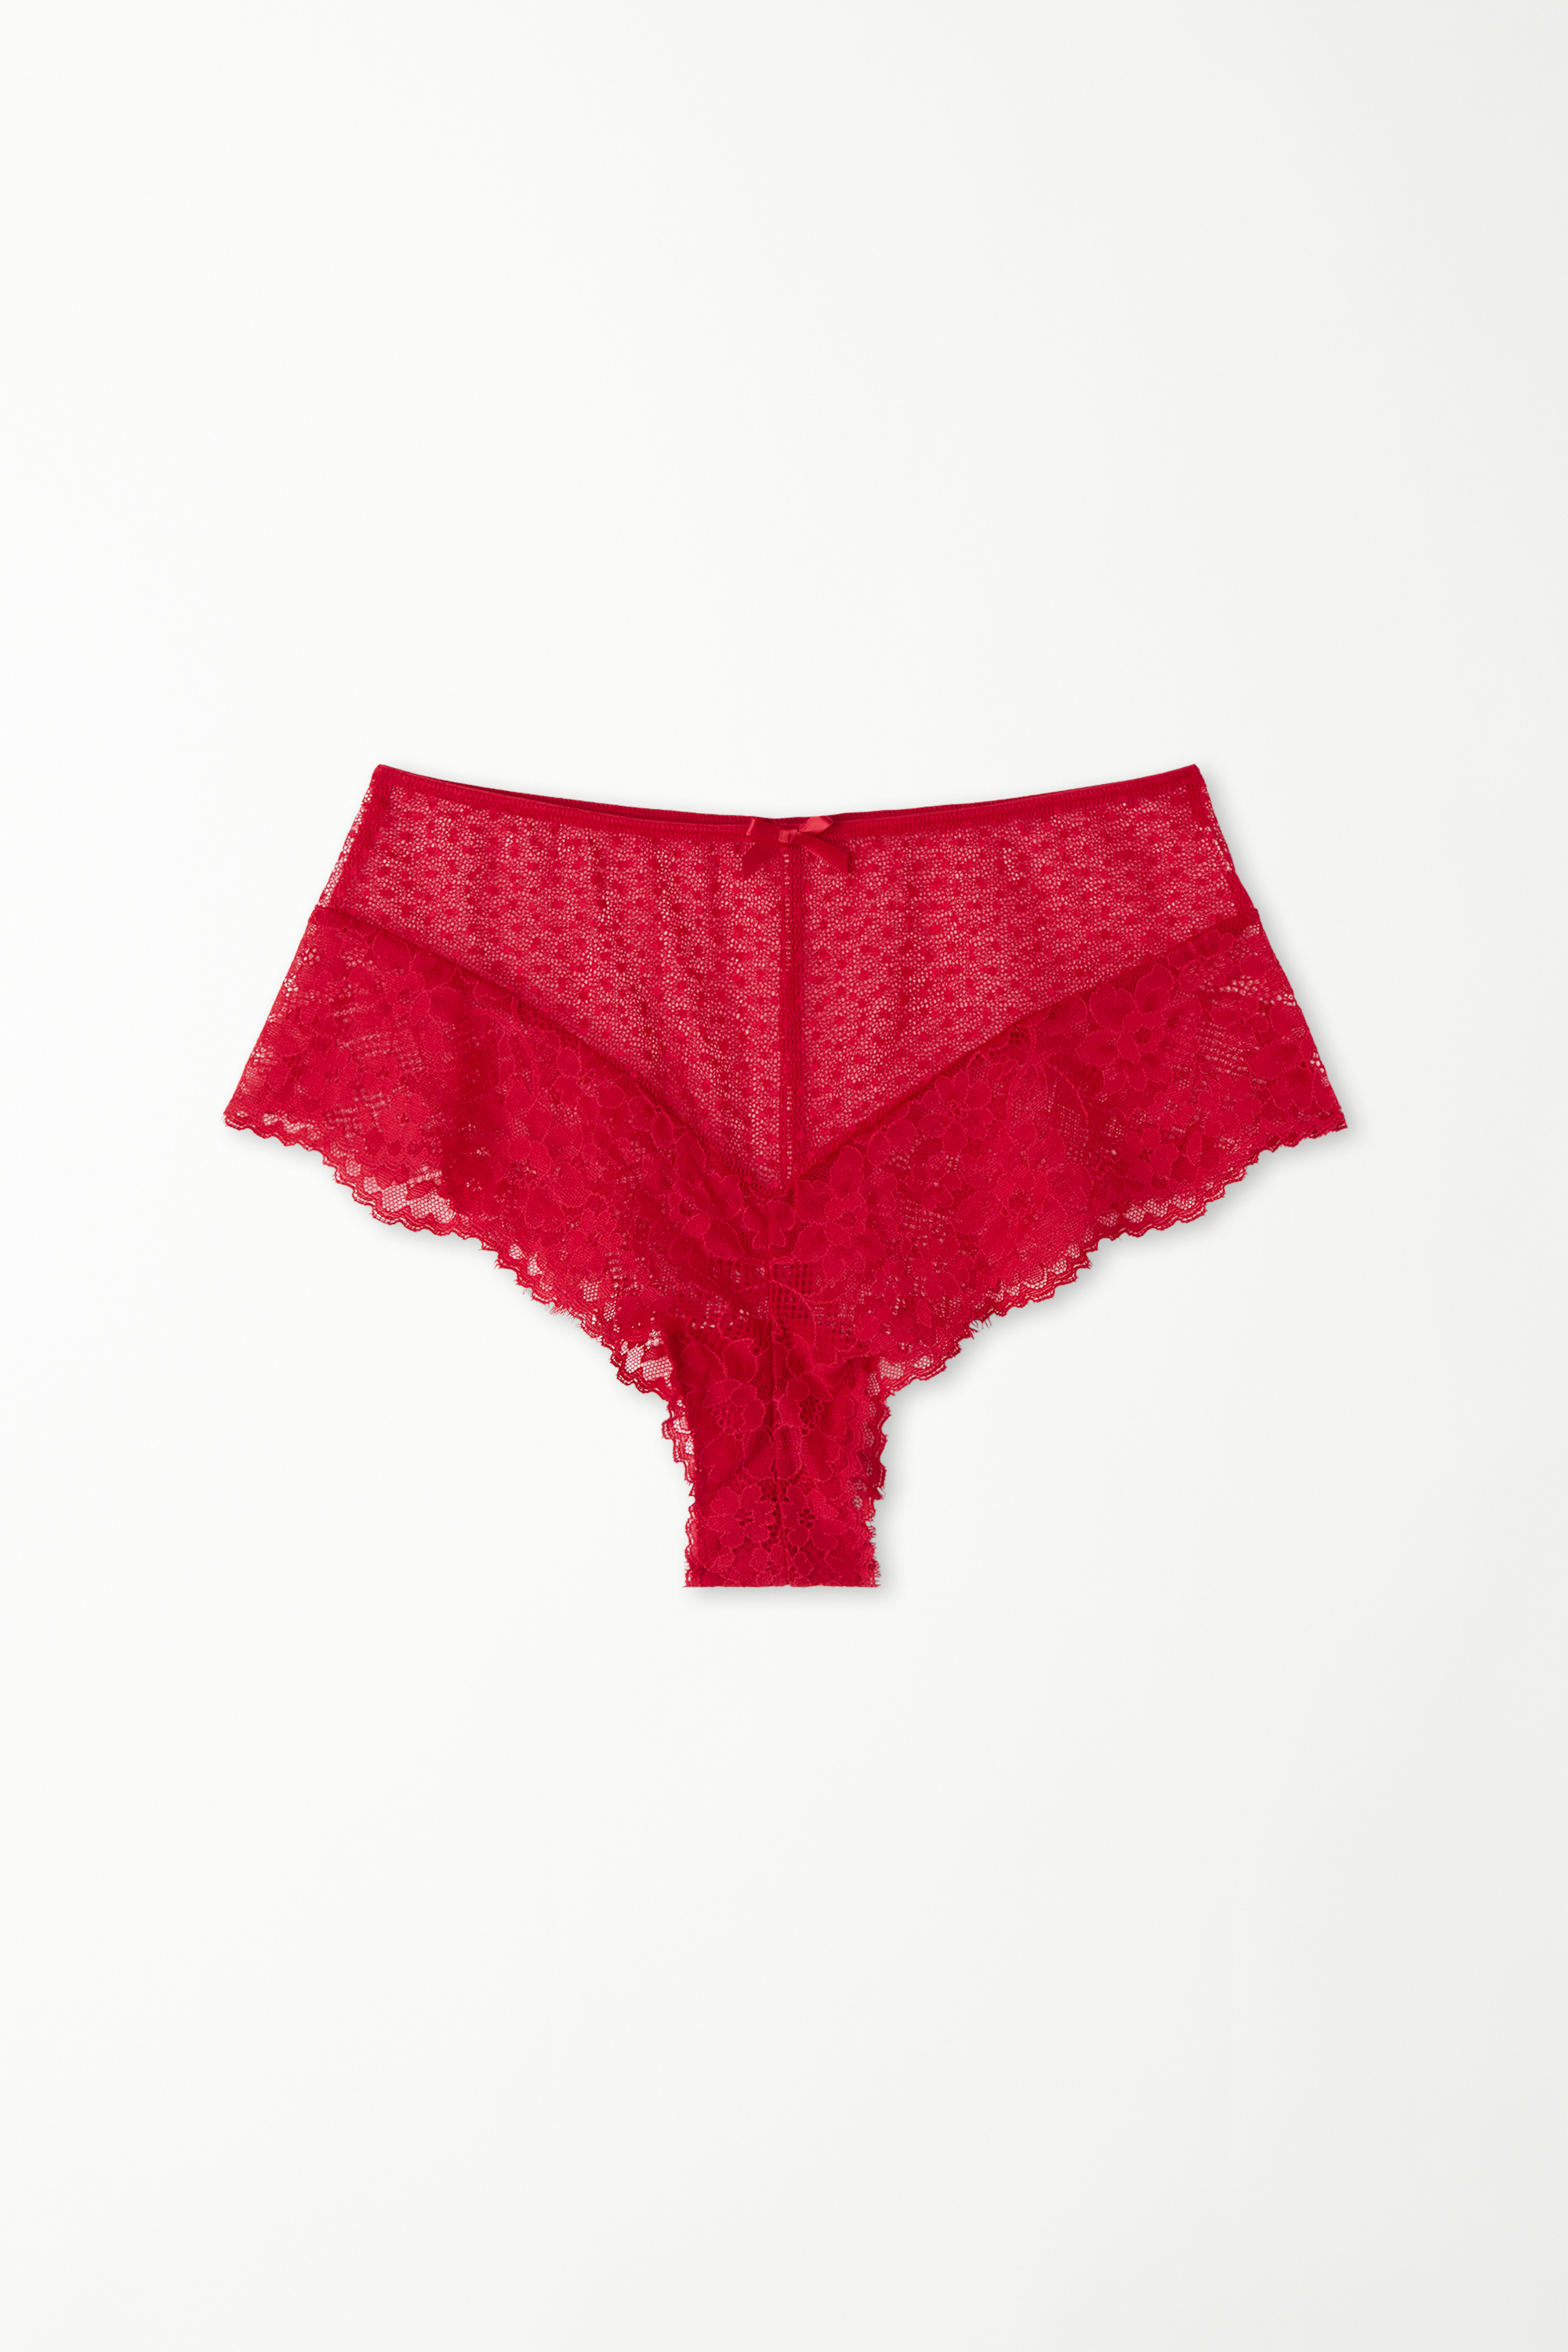 High-Waisted Polka Dot Tulle and Lace French Knickers